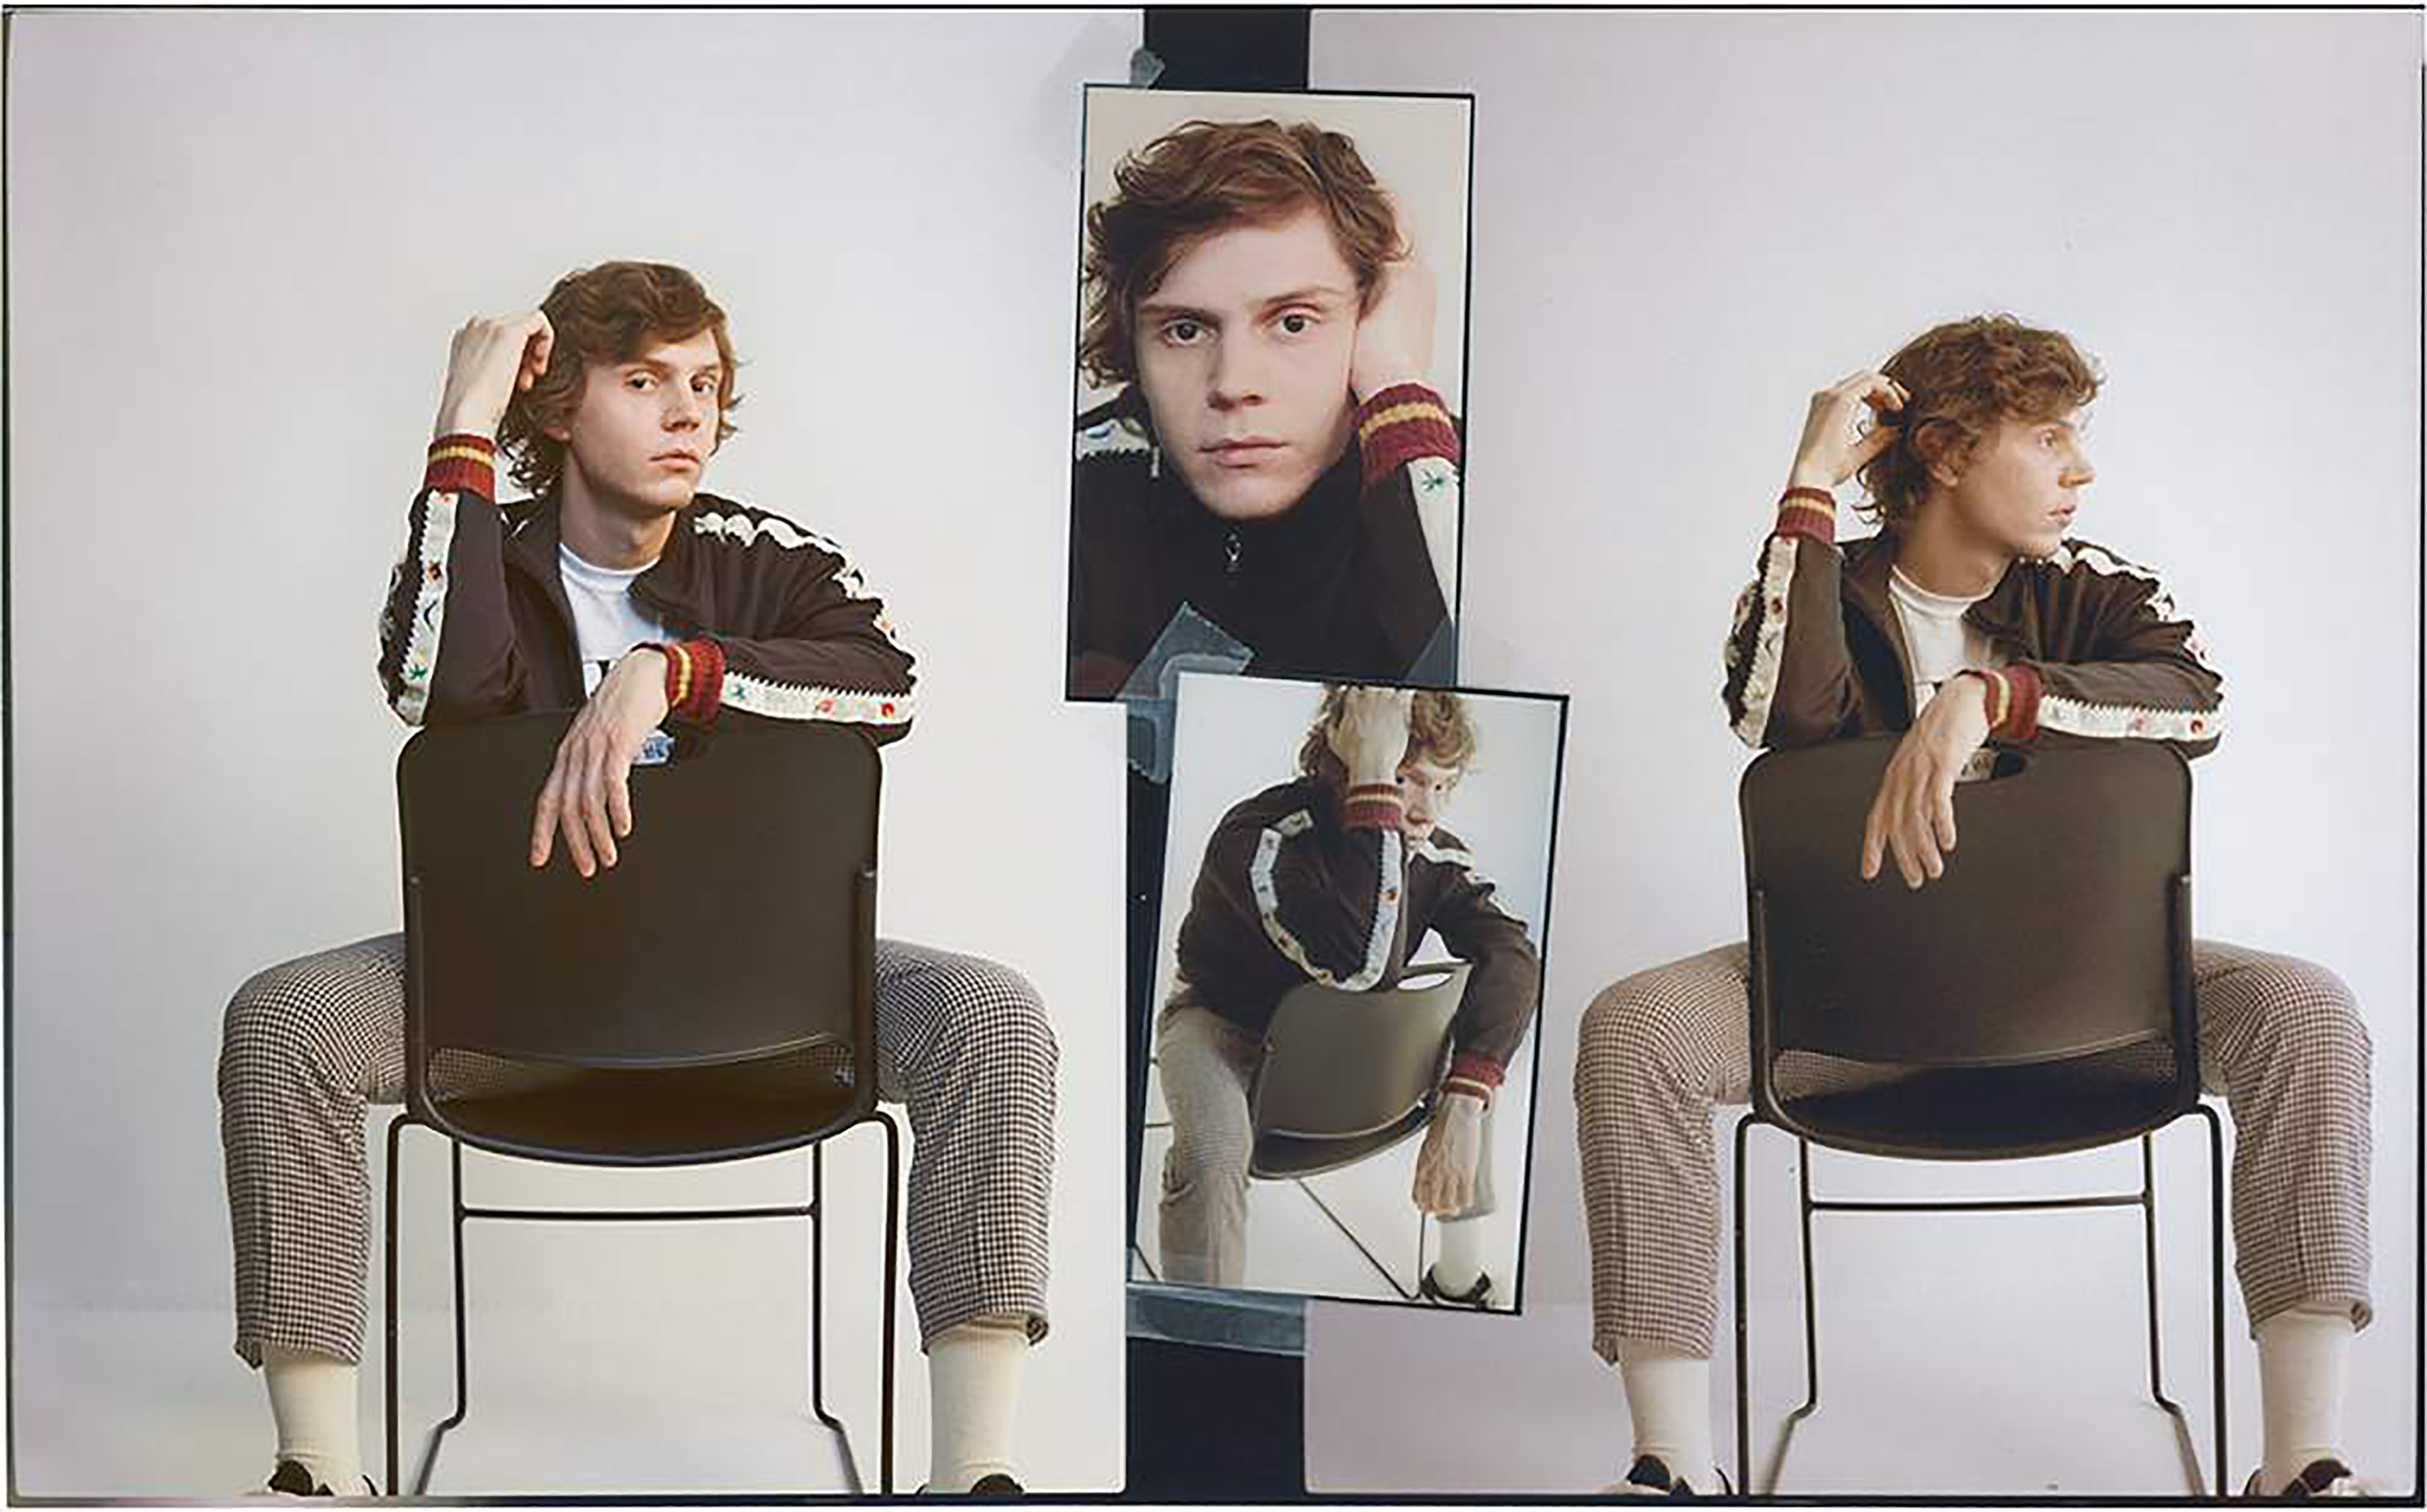 evan-peters-opens-up-about-his-role-in-pose-07.jpg